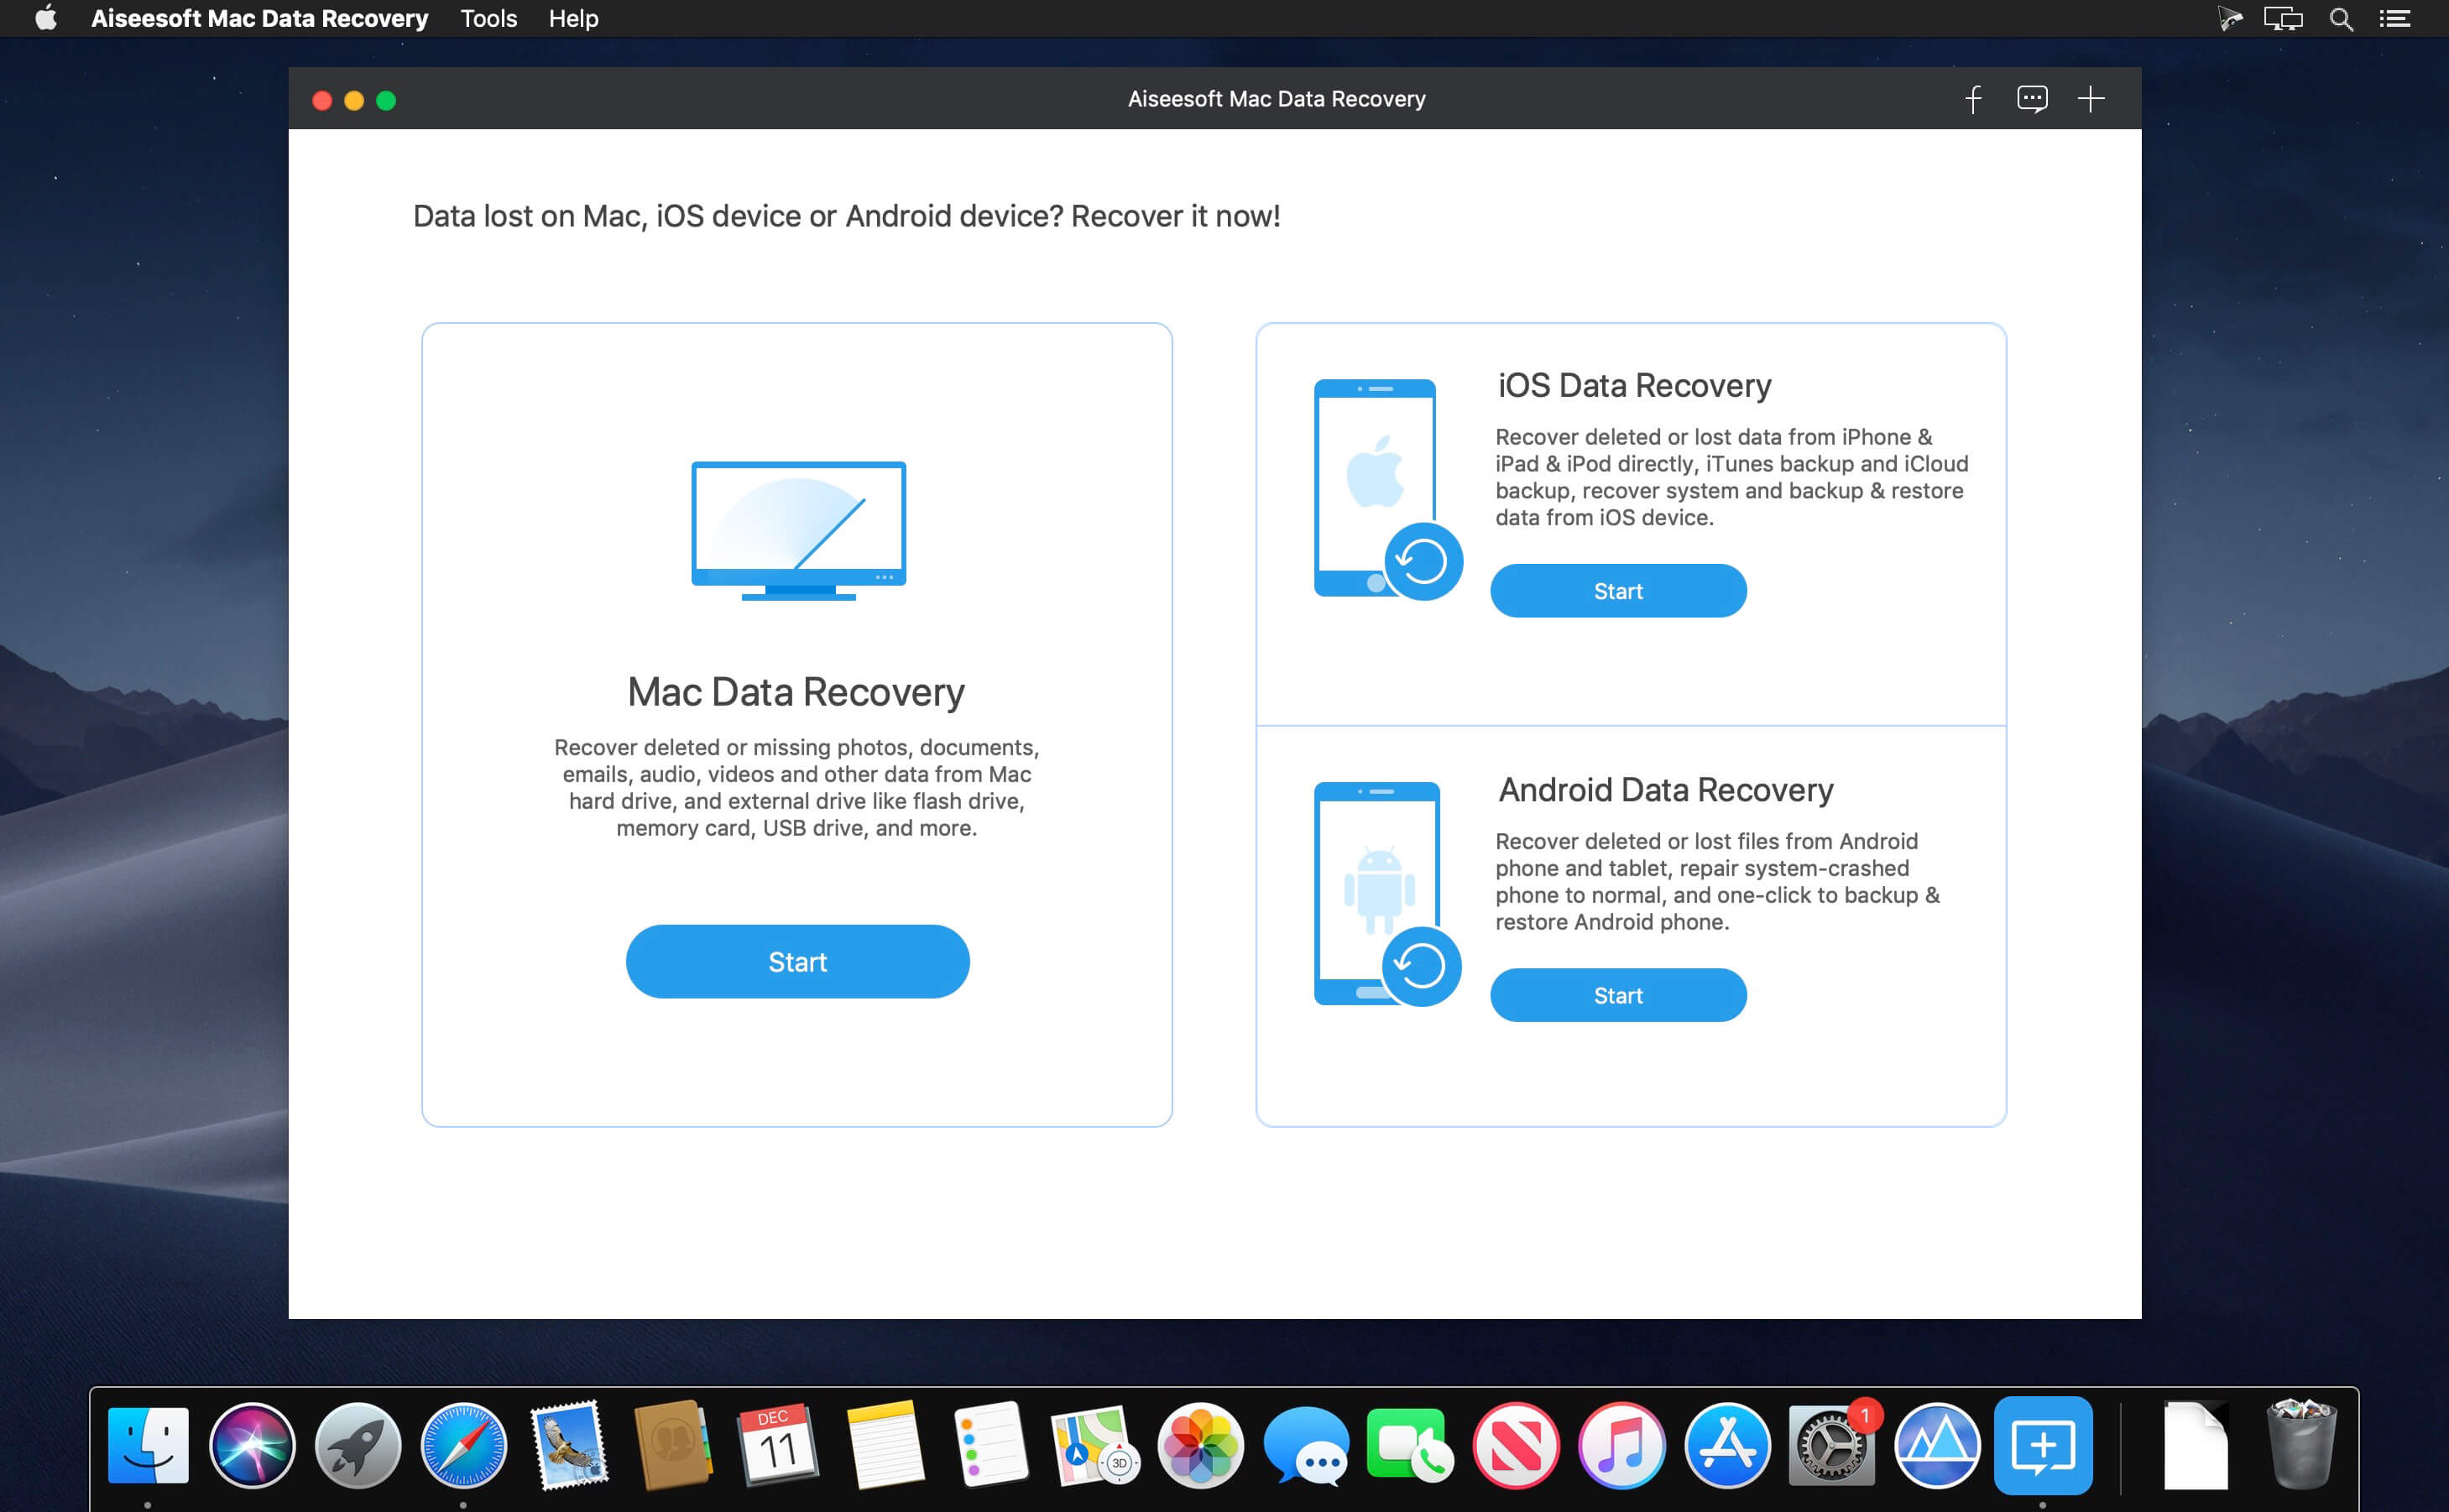 Aiseesoft Data Recovery 1.6.12 instal the new version for apple